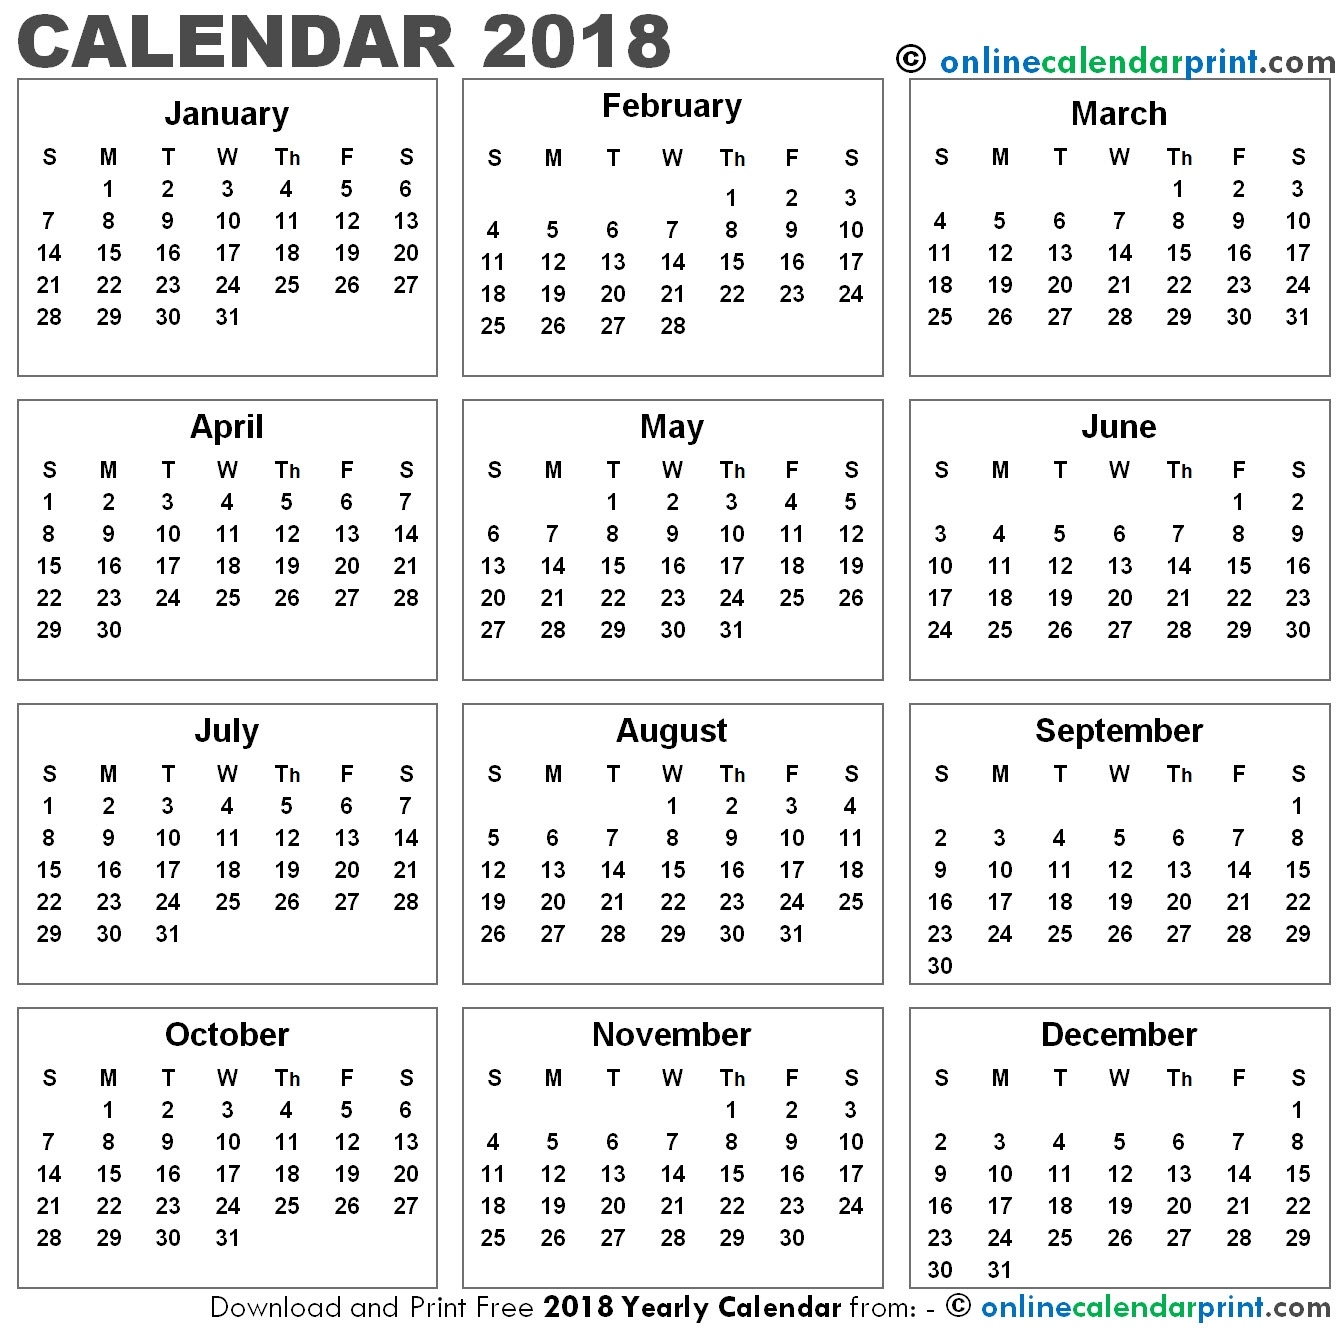 Free 2018 12 Months Calendar In One Page Portrait 4 Calendar Months On One Page